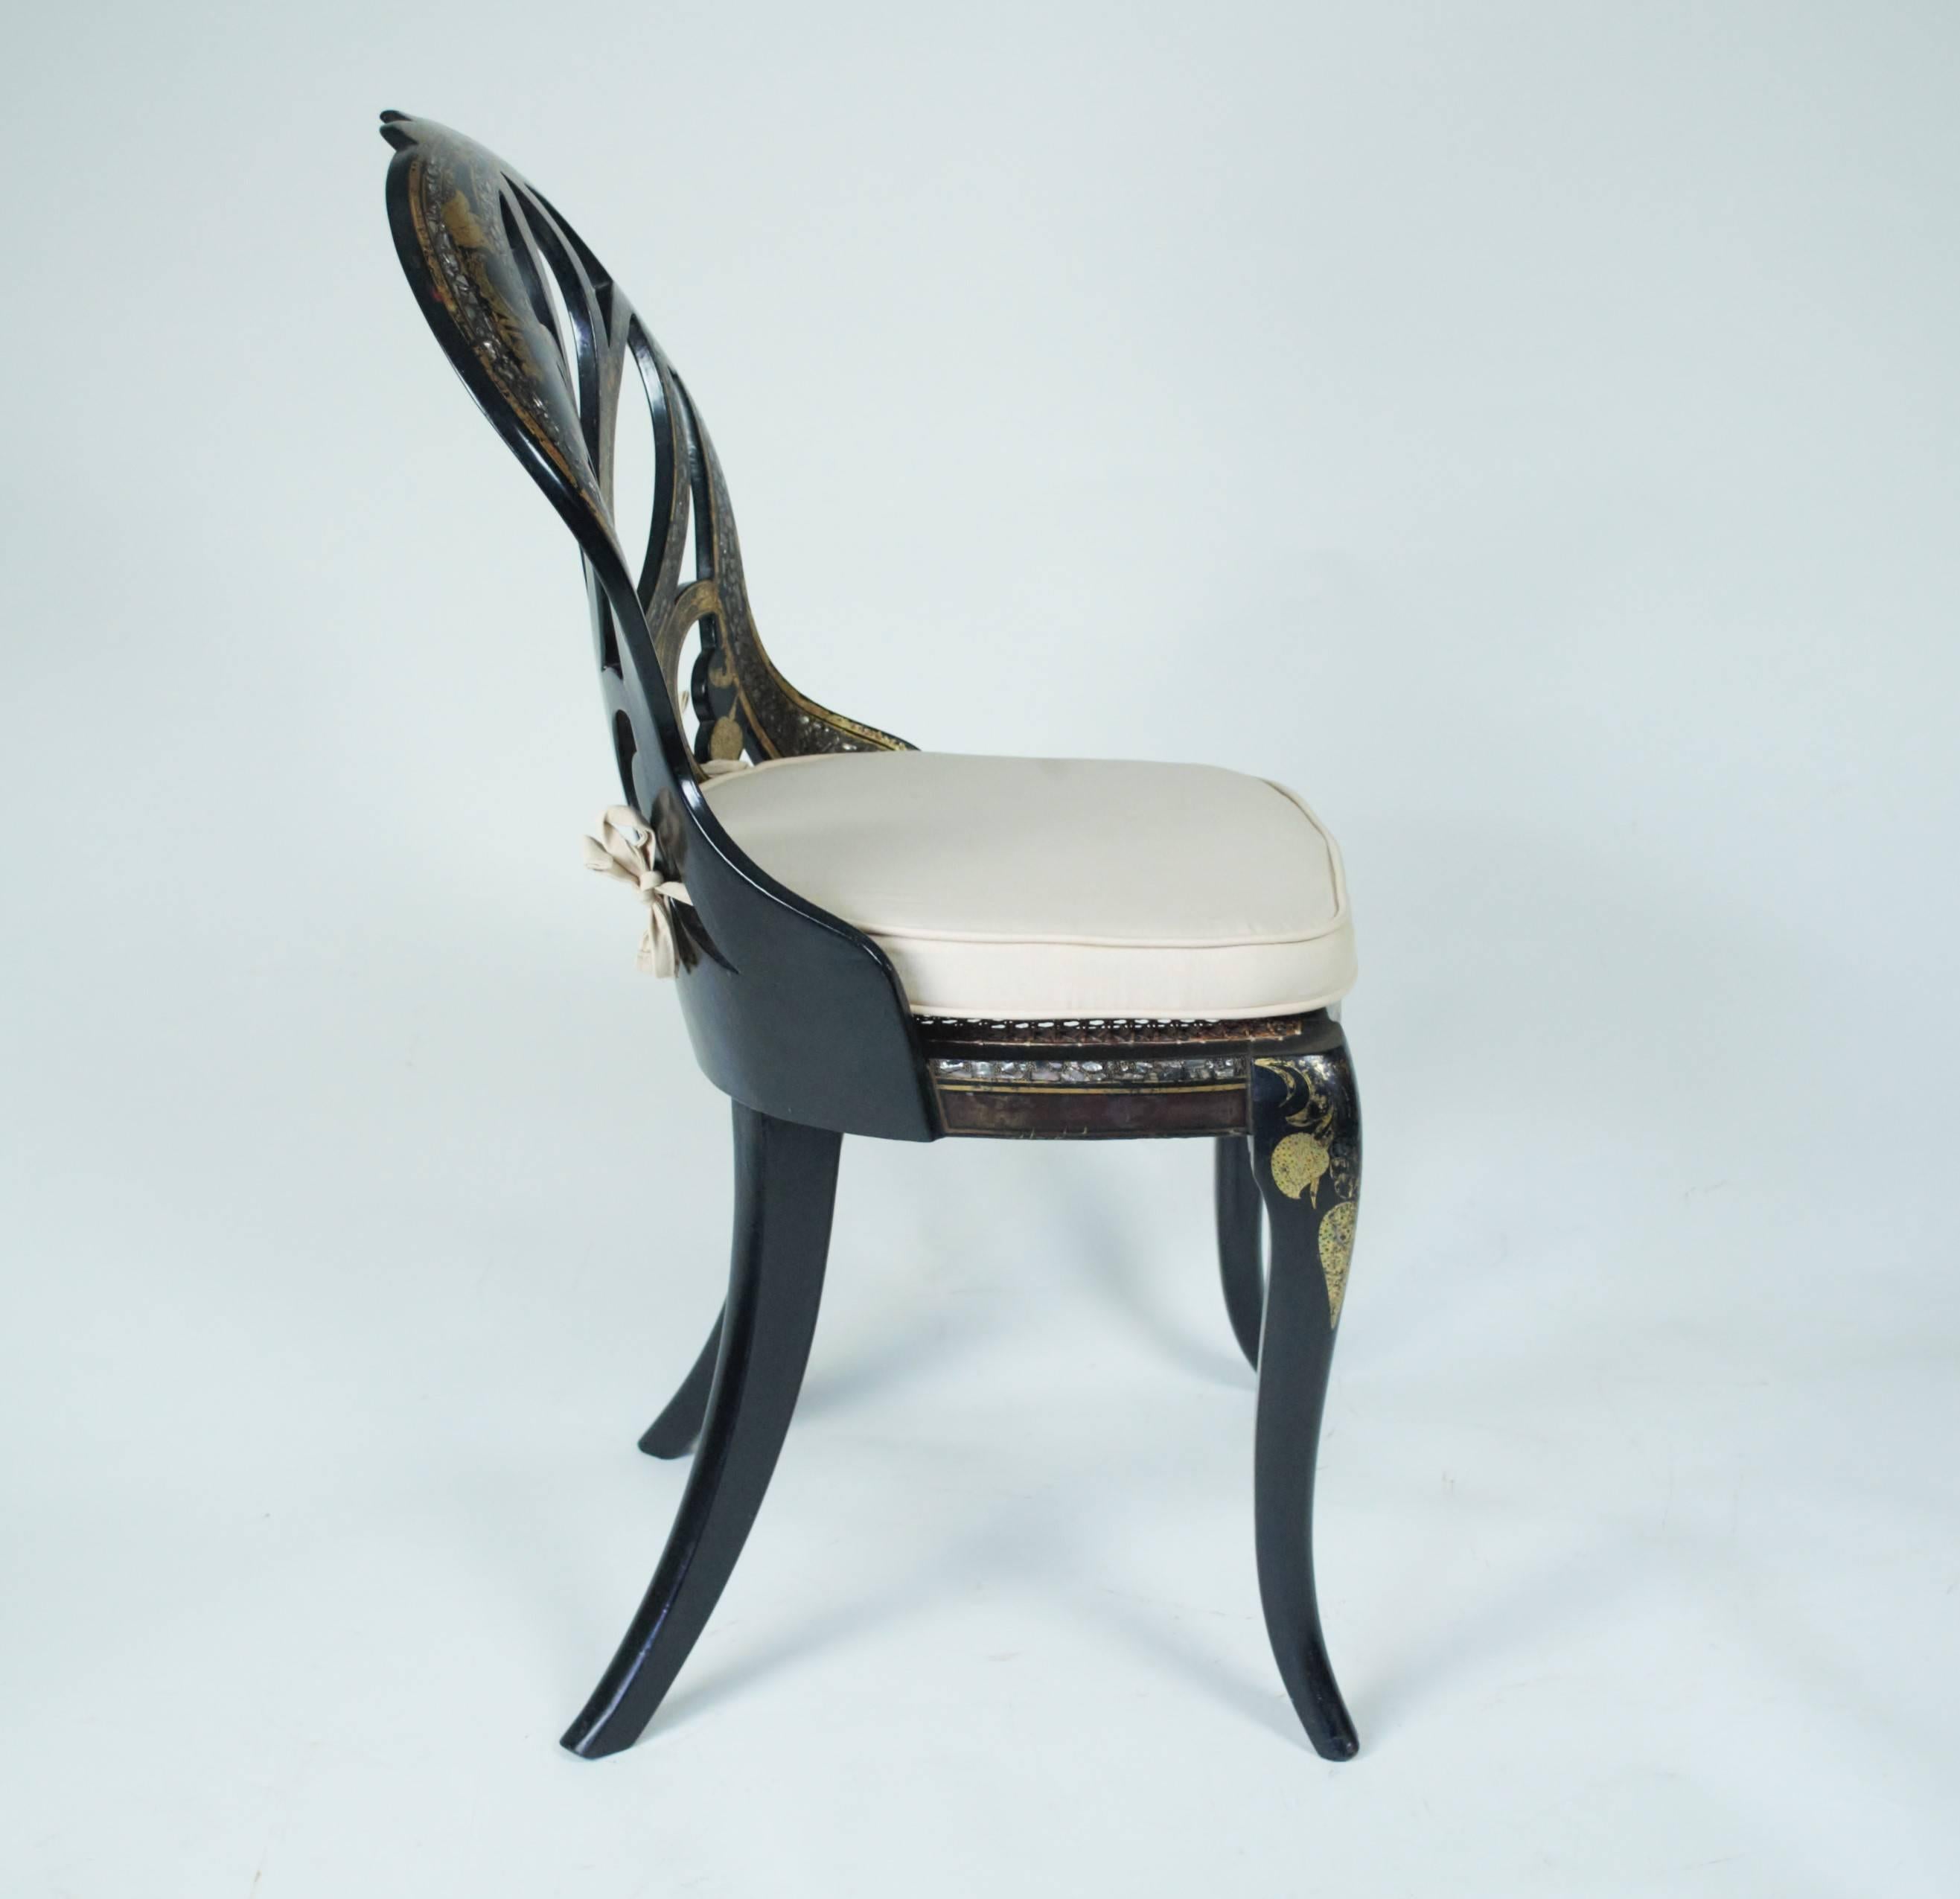 An outstanding pair of exhibition standard black Japanned side chairs by John Bettridge of Birmingham, each with metal makers labels under the seat rails. The backs, legs and seat rails profusely decorated with gold leaf, painted highlights and